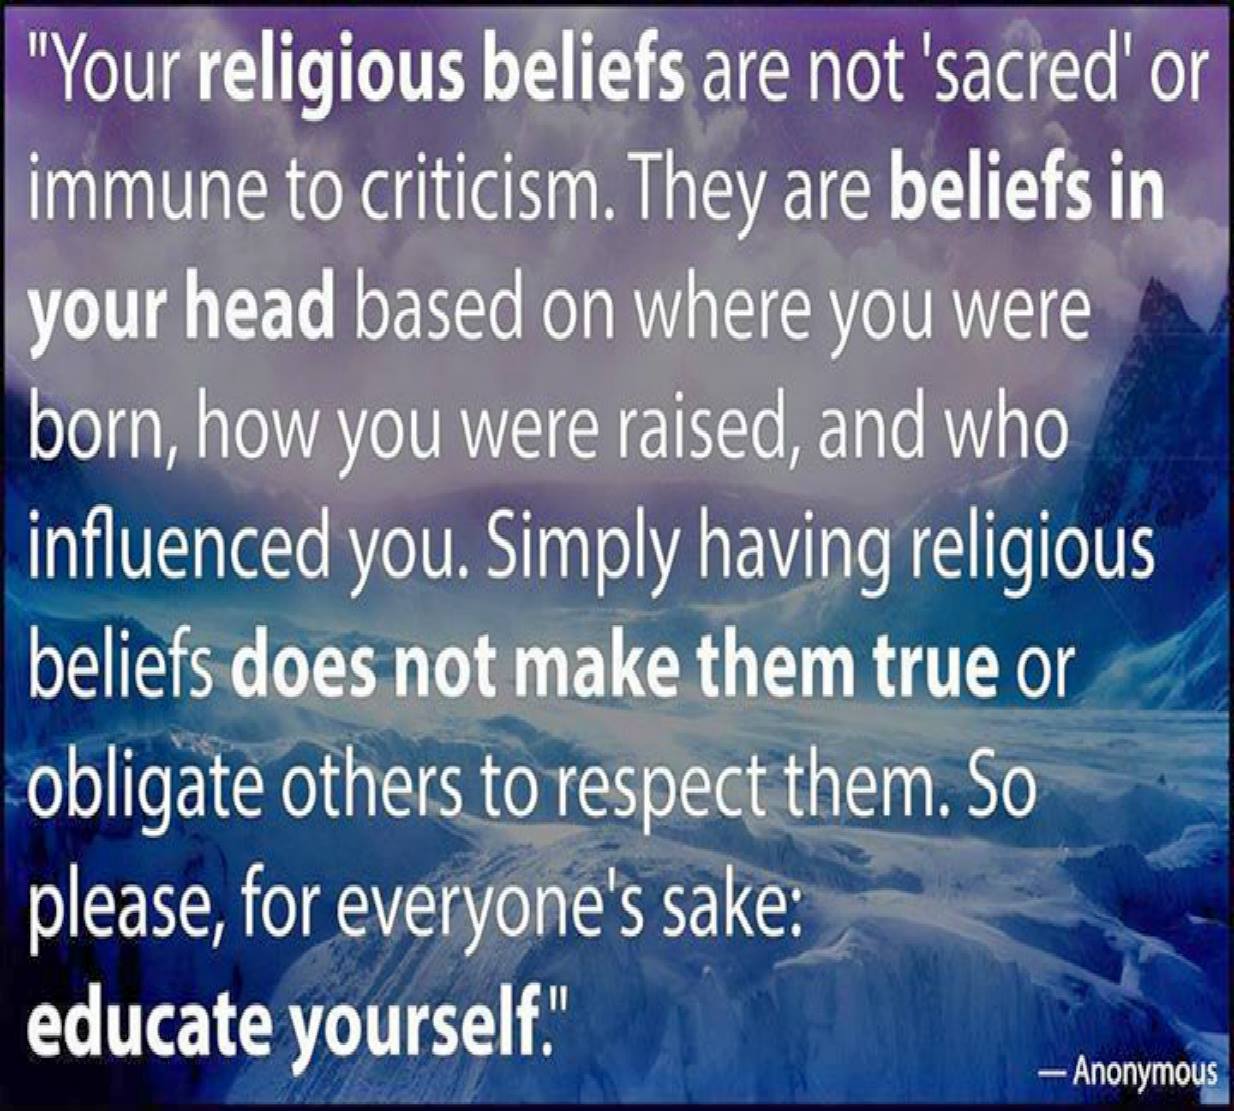 Your religious belief are not ‘sacred’ or immune to criticism